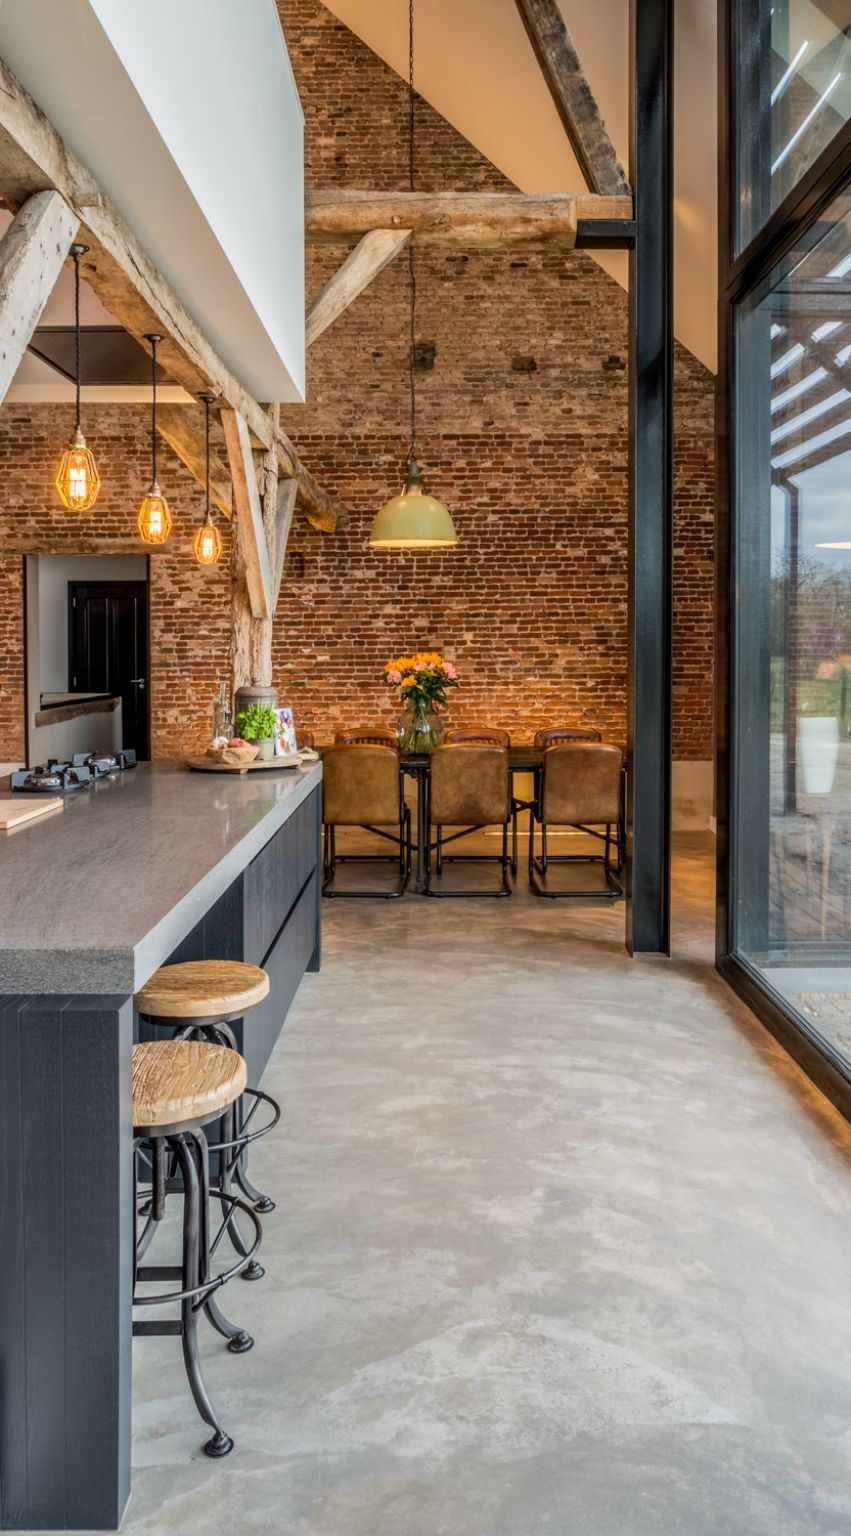 The concrete floor adds an industrial vibe to the house and also gives it a modern feel